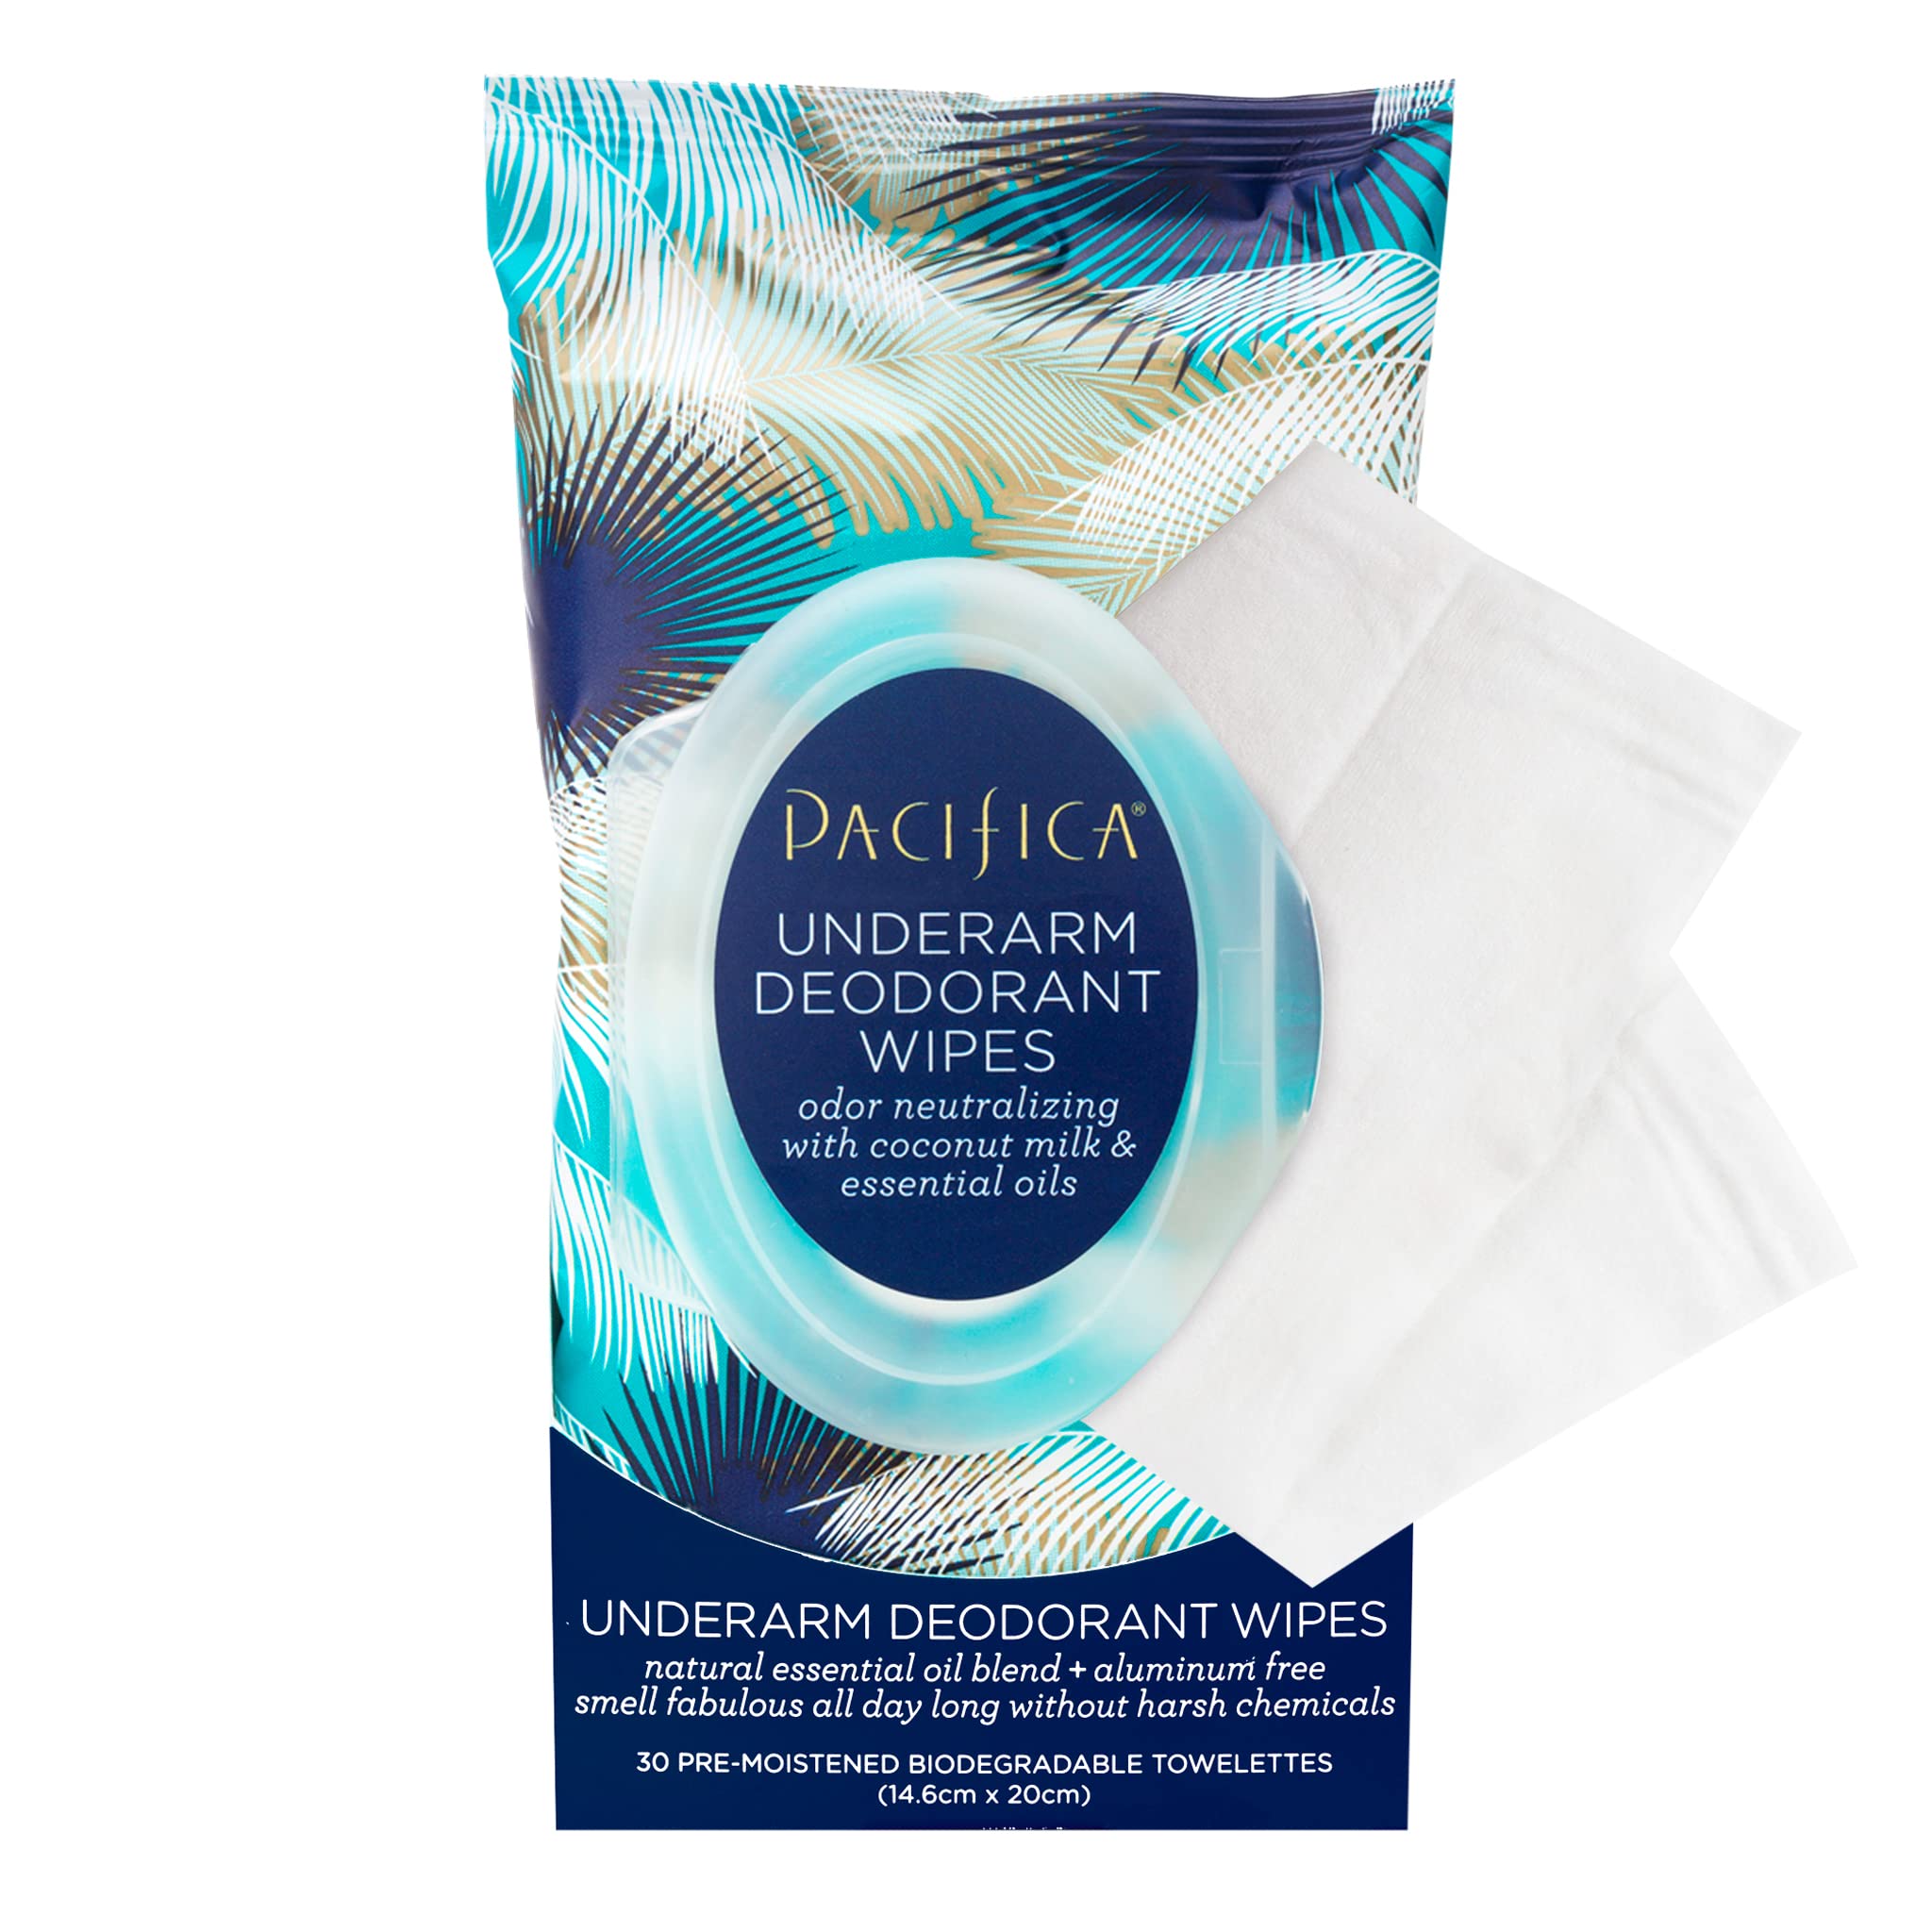 Pacifica Beauty, Coconut Milk & Essential Oils Underarm Deodorant Wipes, 30 Count (Pack of 2), Remove Odor On-The-Go, Aluminum Free, Travel Friendly, Fresh Coconut Scent, 100% Vegan and Cruelty Free